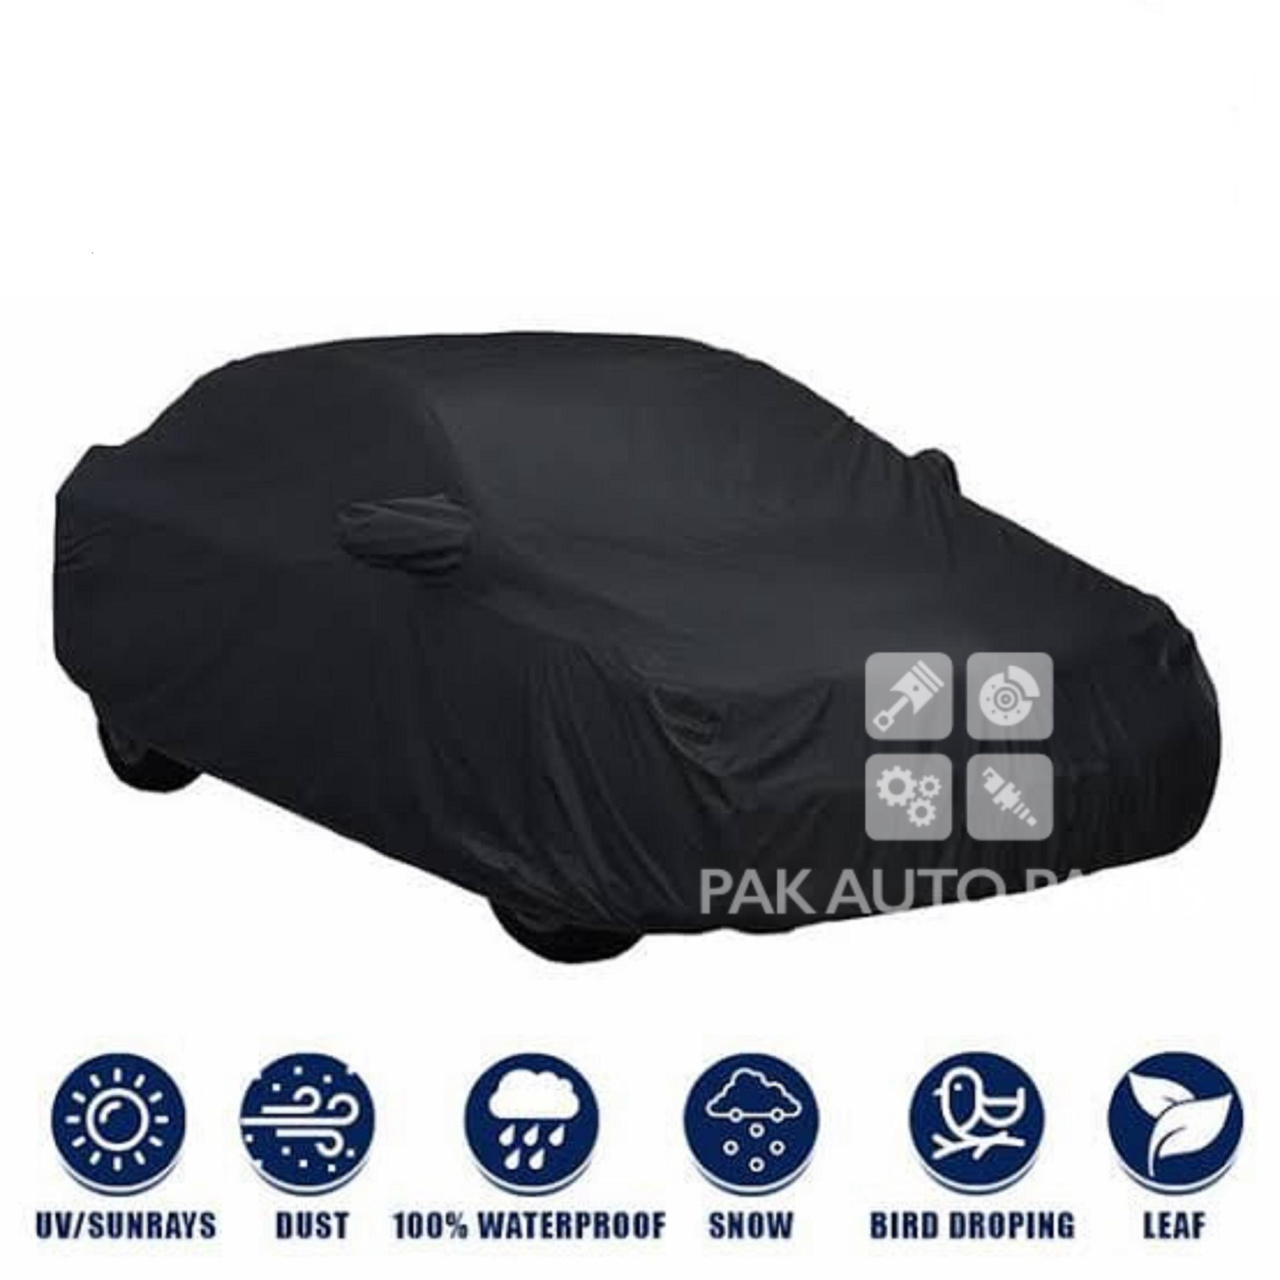 Picture of New Honda City 2022 Carbon Coated Top Cover Premium Quality, Water Proof~Scratches Proof~Double Stitched~Cover Whole Body Packed In High Quality Bag